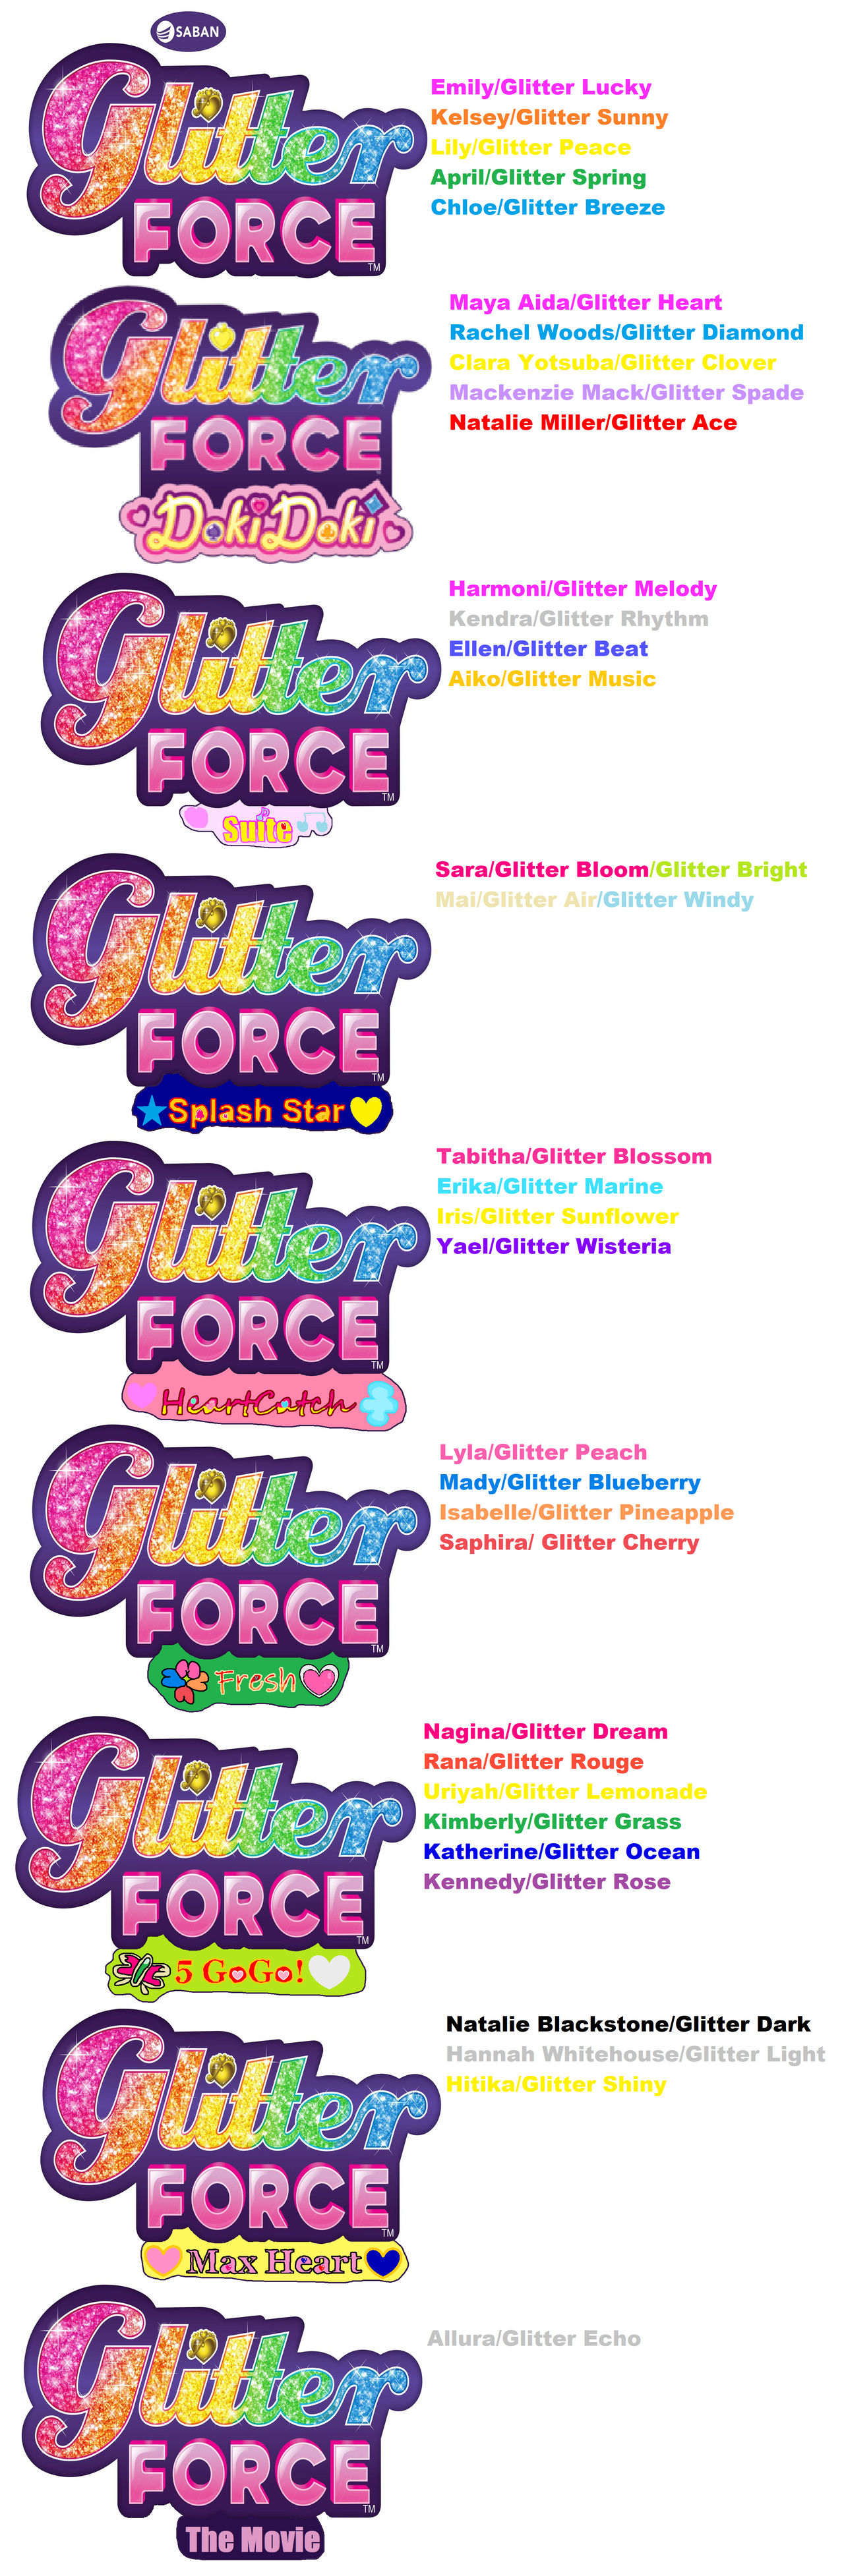 Which Glitter Force Character Are You?